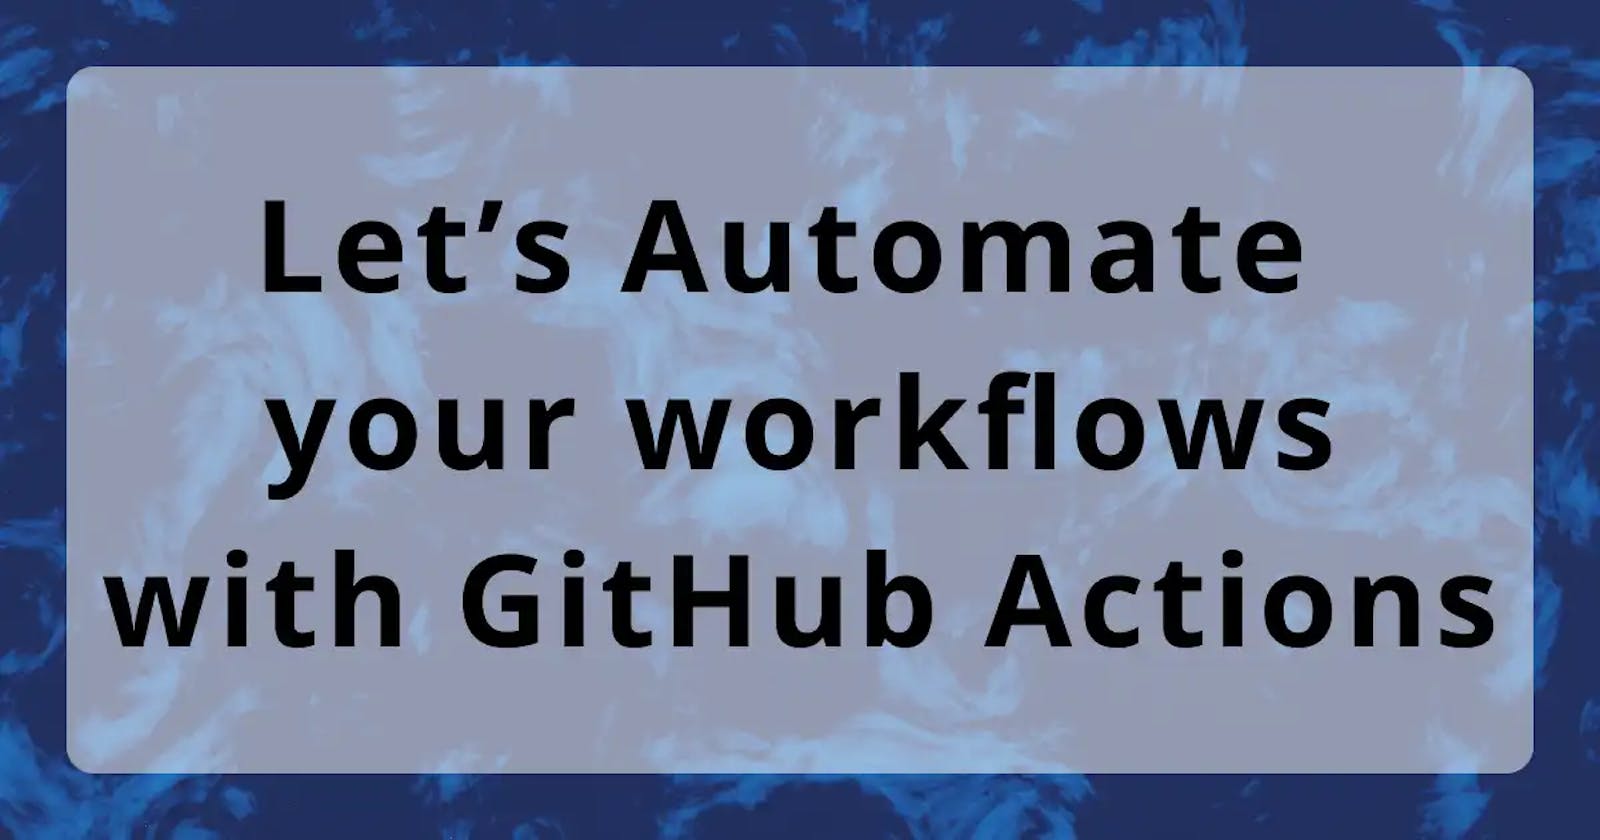 Let's Automate your workflows with GitHub Actions!